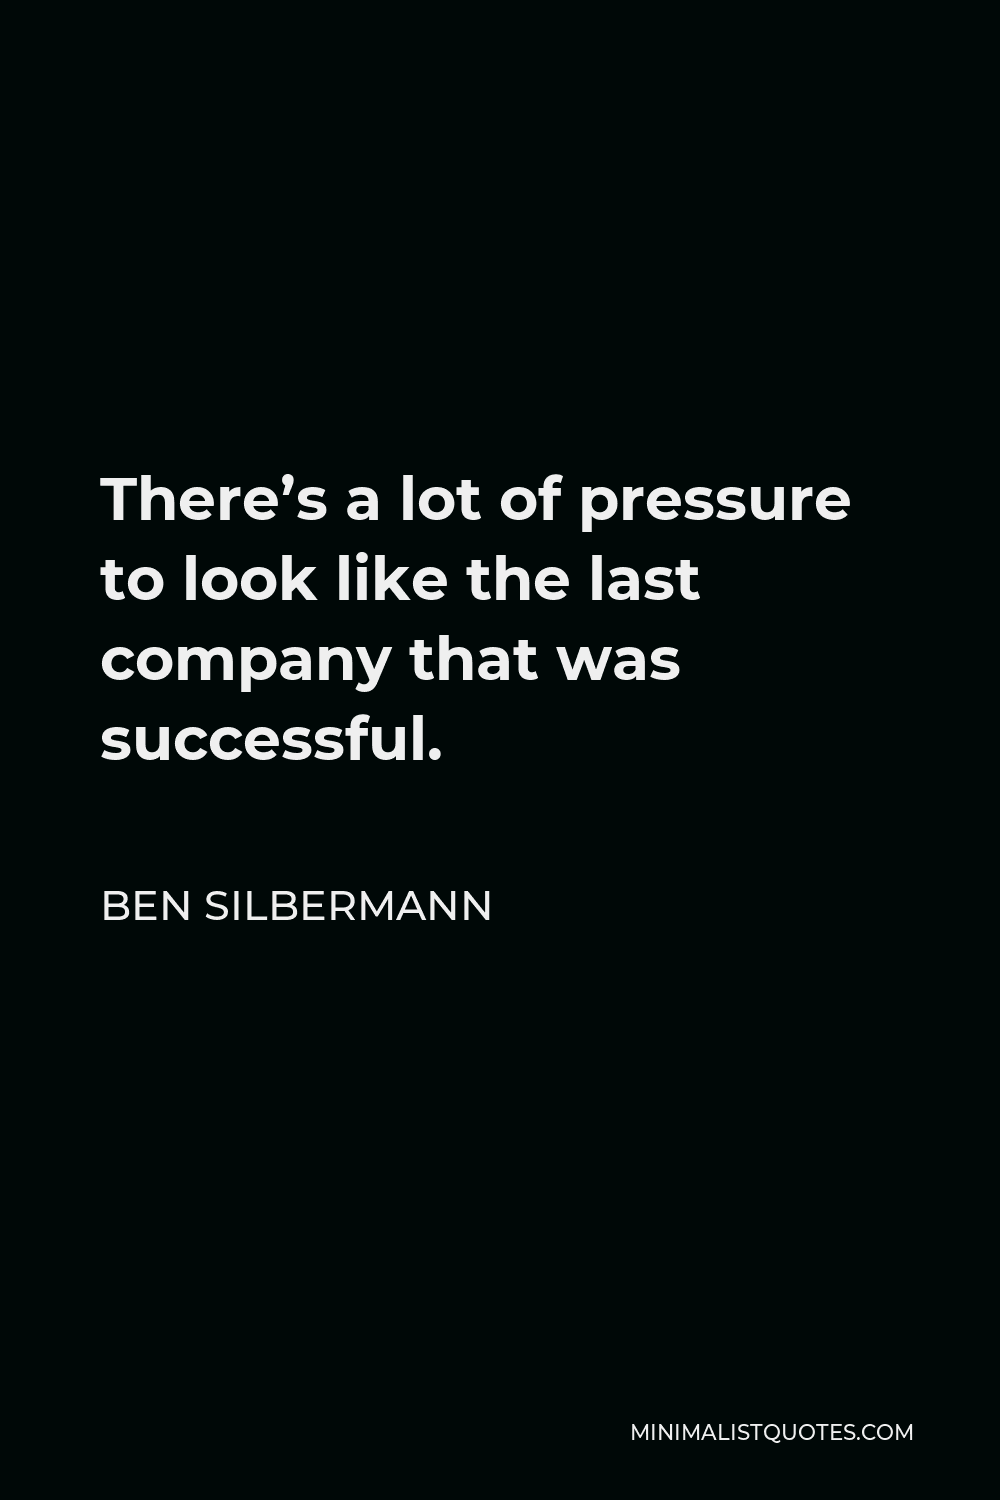 Ben Silbermann Quote - There’s a lot of pressure to look like the last company that was successful.